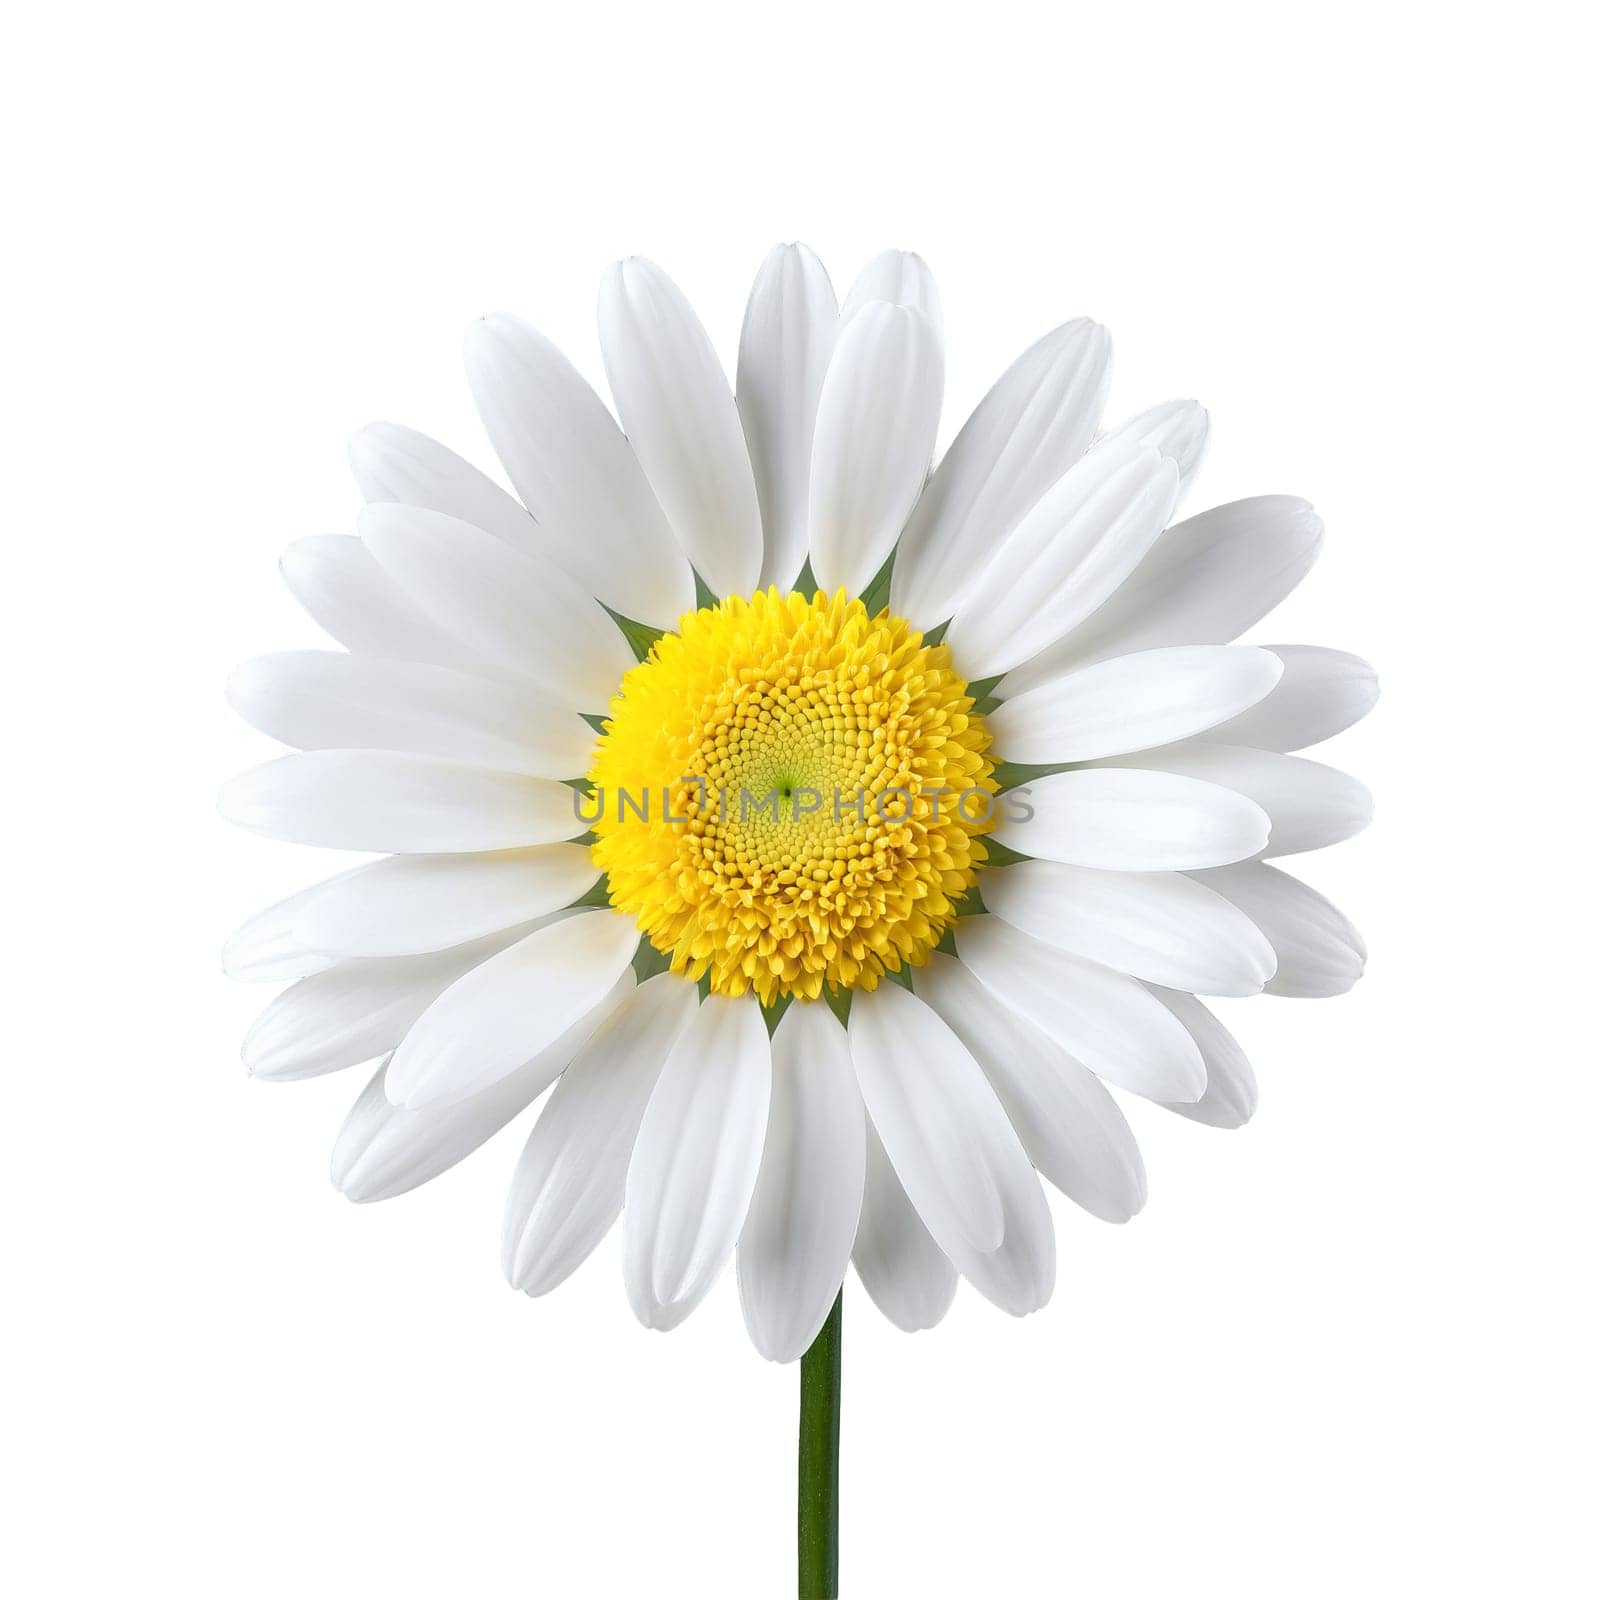 White daisy pristine petals radiating from golden yellow disc florets slightly overlapping Bellis perennis. Flowers isolated on transparent background by Matiunina